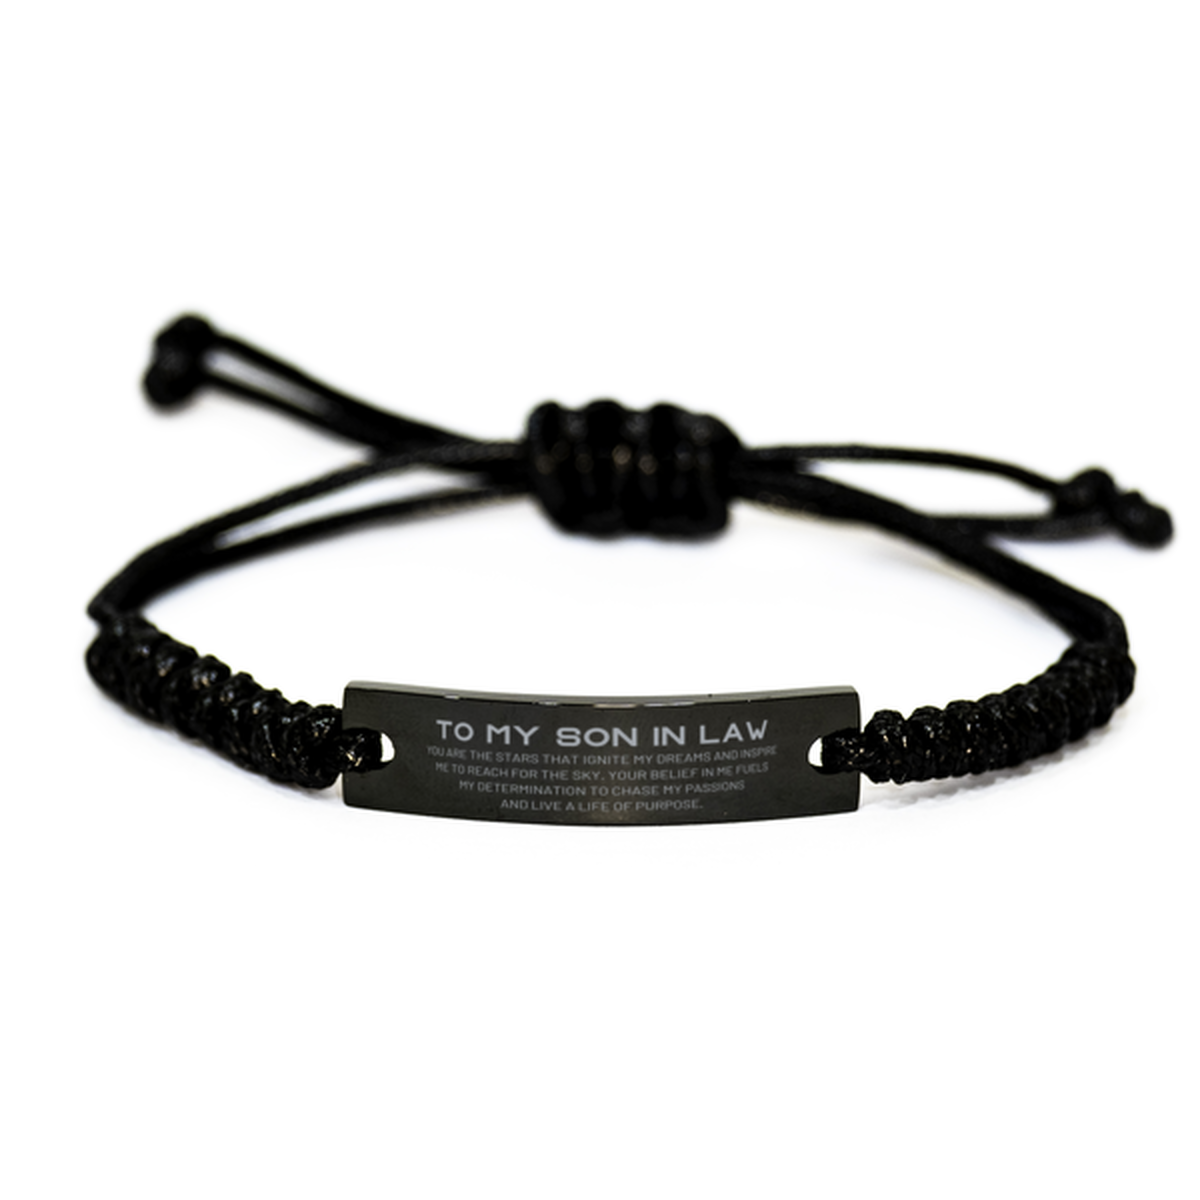 To My Son In Law Black Rope Bracelet, You are the stars that ignite my dreams and inspire me to reach for the sky, Birthday Unique Gifts For Son In Law, Thank You Gifts For Son In Law